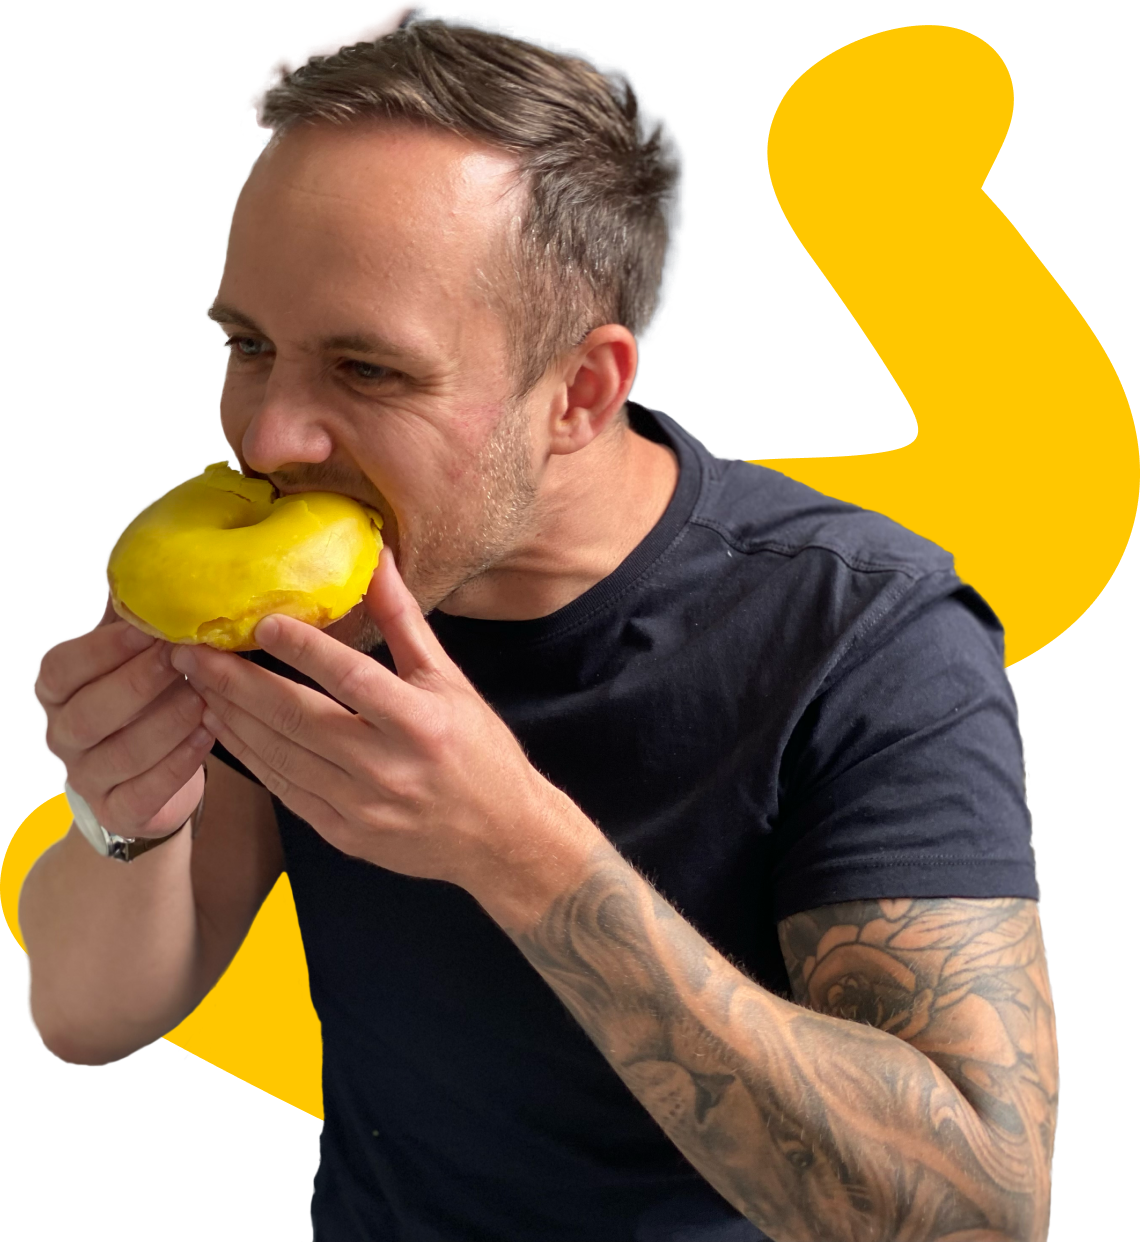 A male Minder, with tattoos on his left arm, a watch on his right wrist, and wearing a black t-shirt, eats a yellow doughnut that represents the main brand colour for software engineering company Mindera.